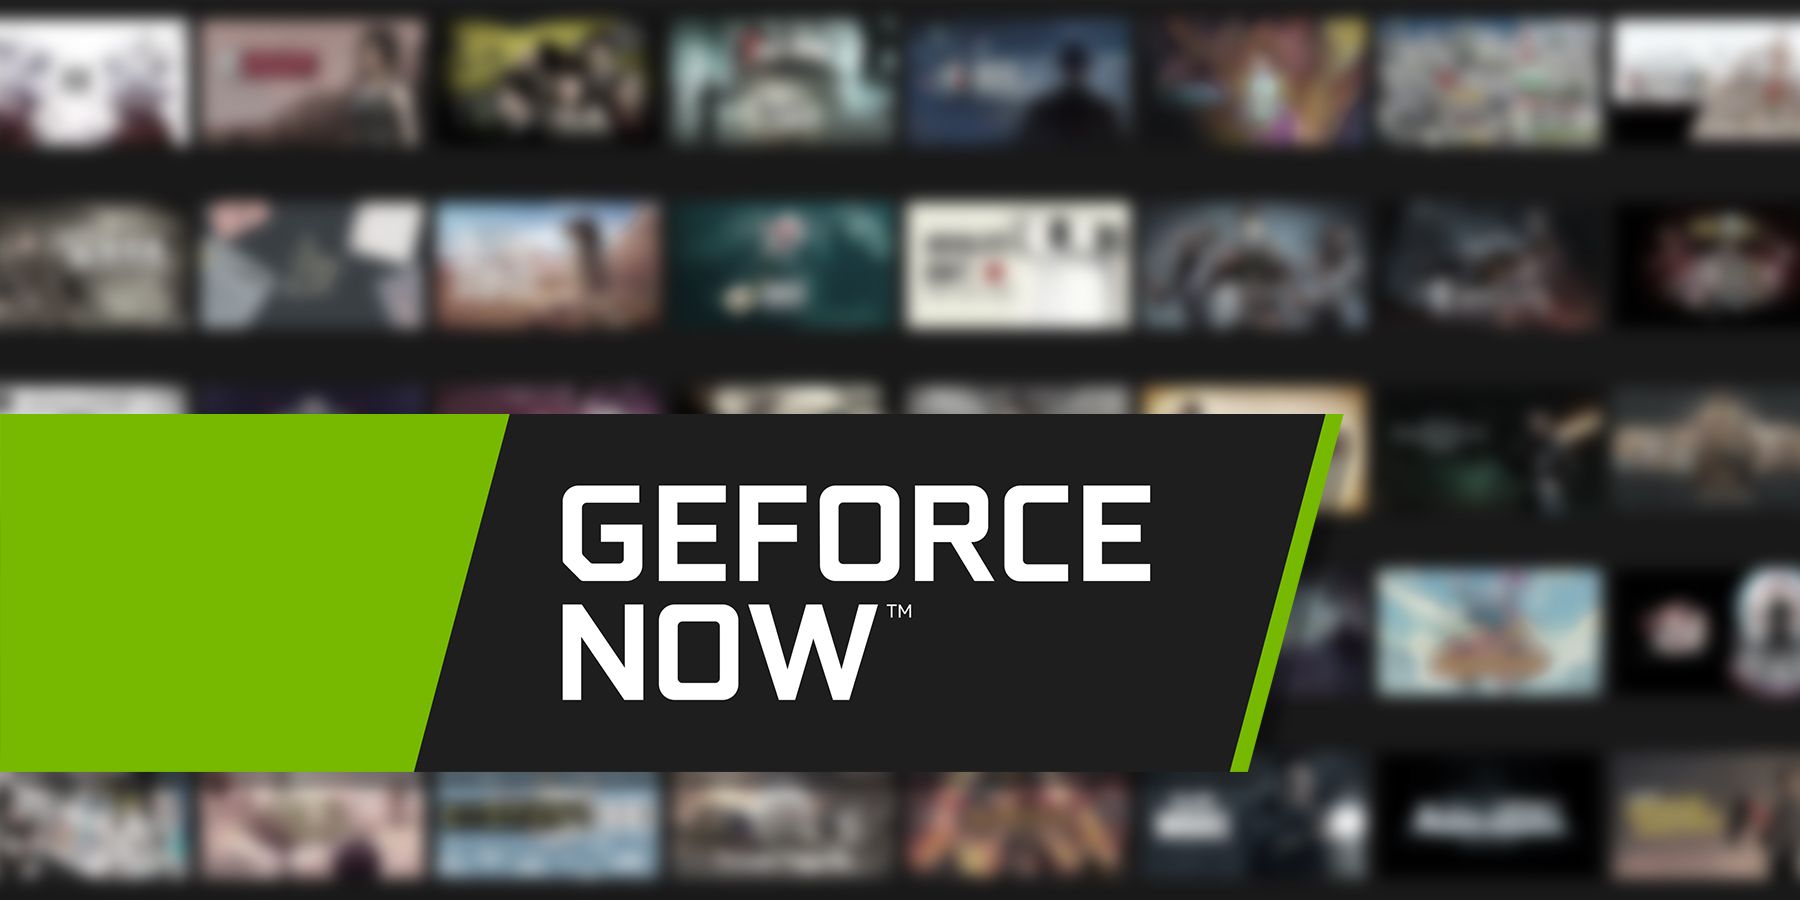 geforce now logo over game images